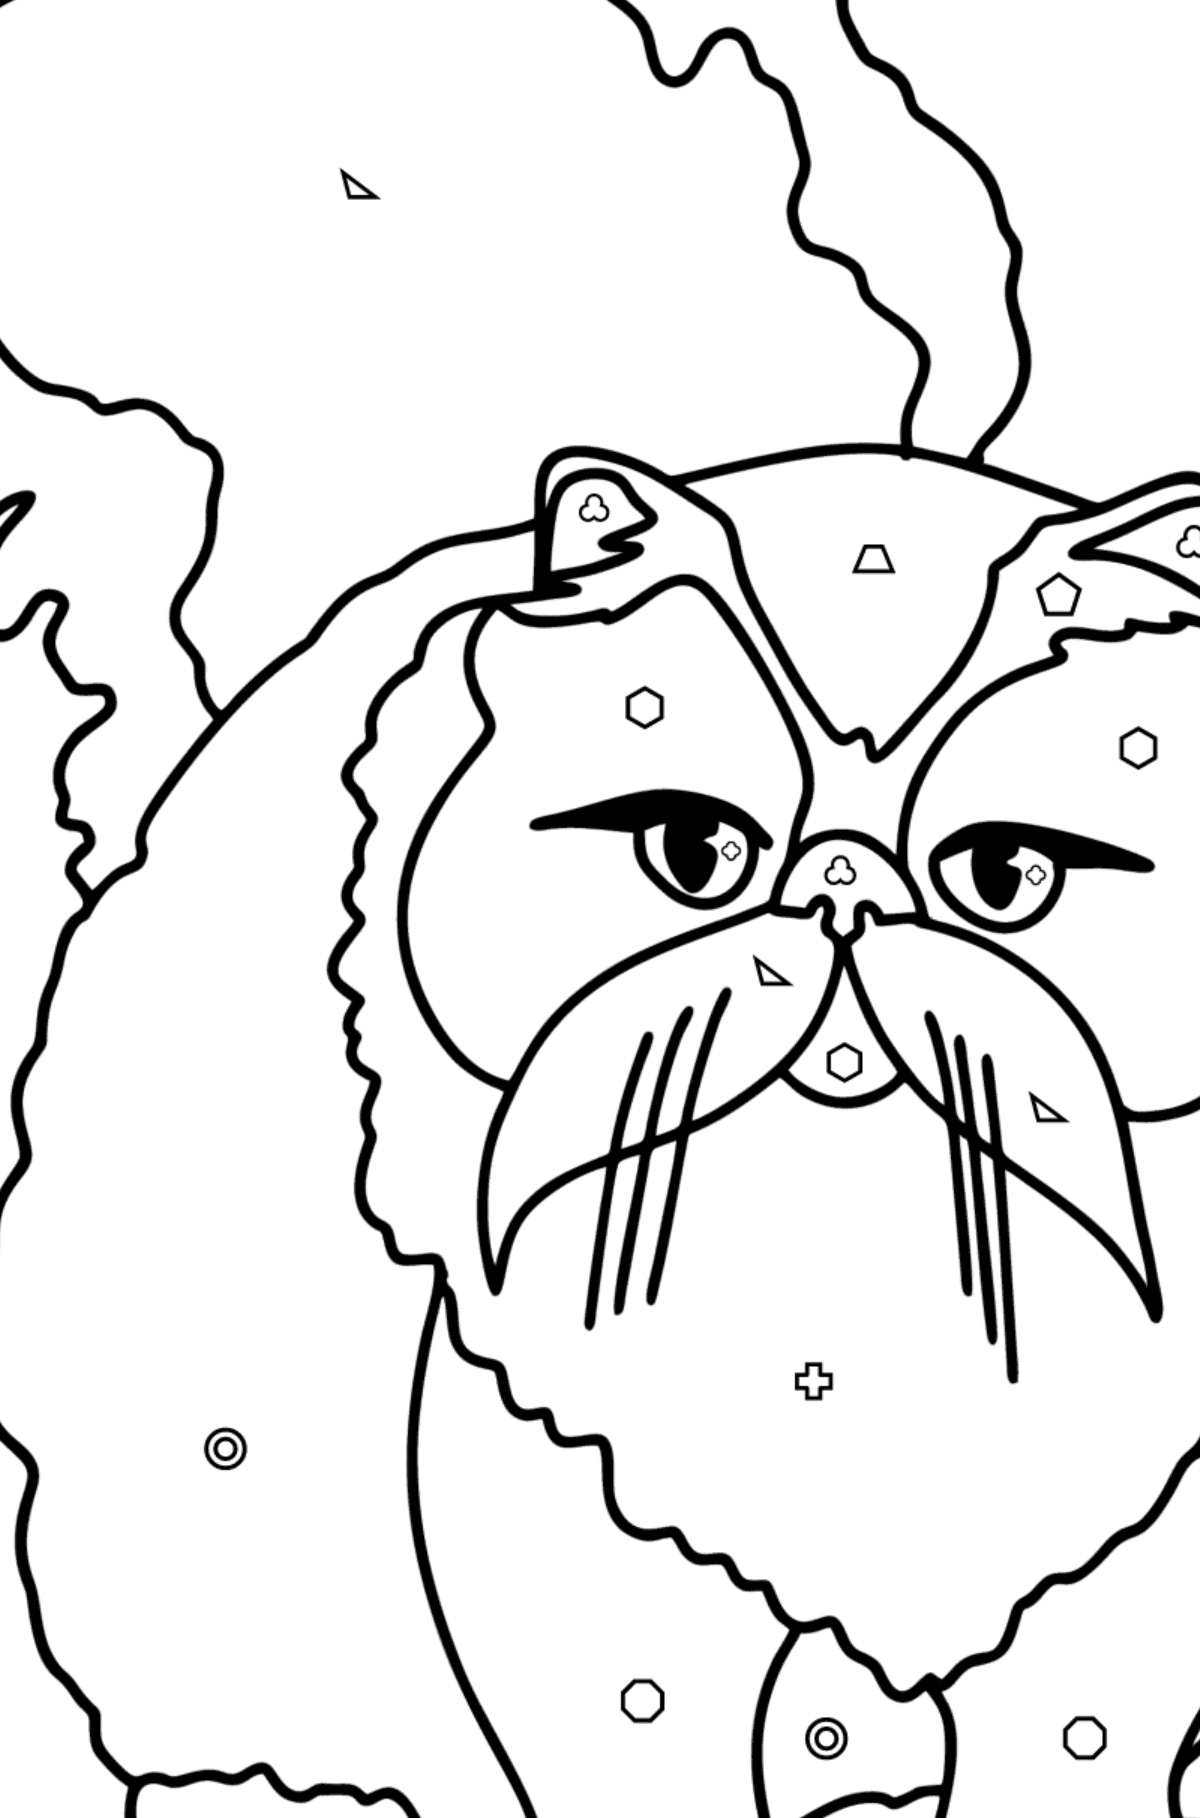 Persian Cat coloring page - Coloring by Geometric Shapes for Kids